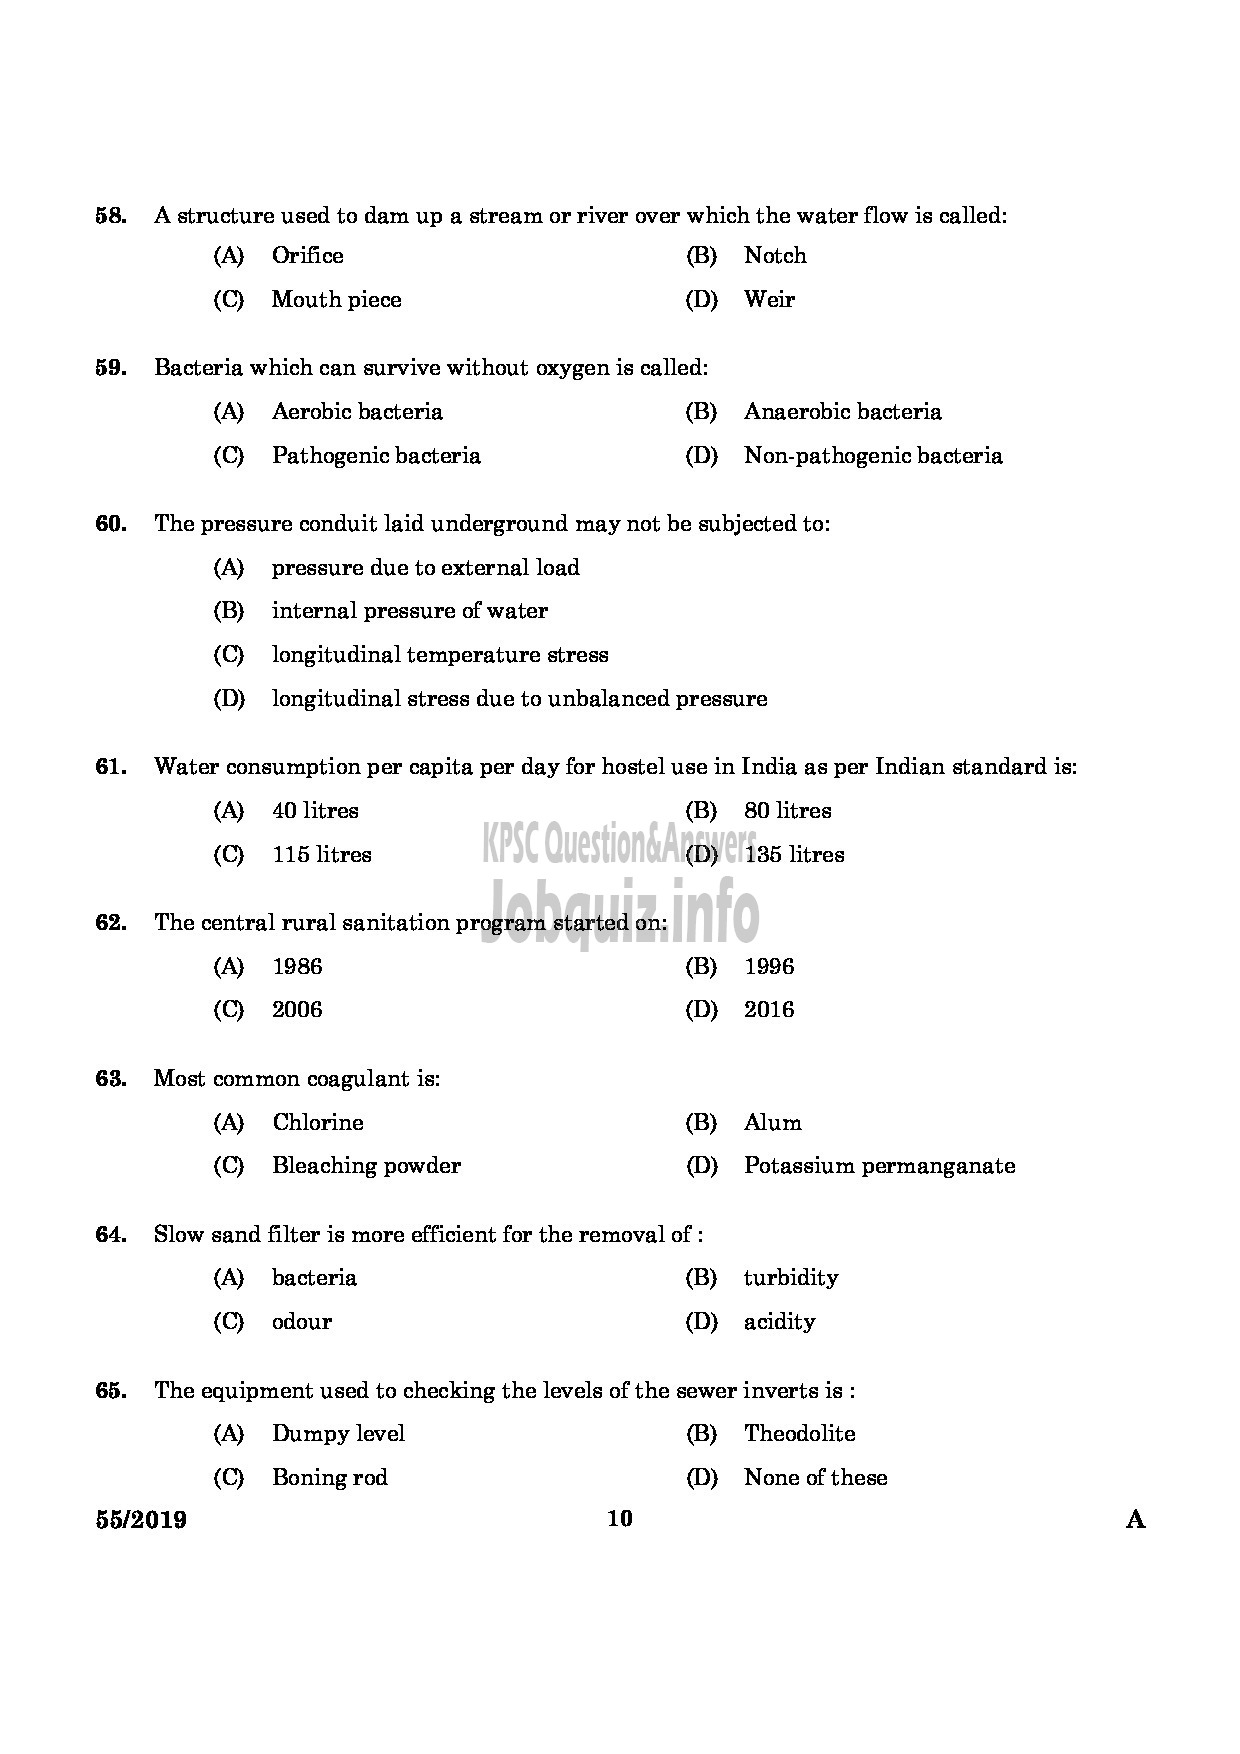 Kerala PSC Question Paper - Overseer / Draftsman (Mechanical) Gr II (Special Recruitment From Among SC/ST) English -8